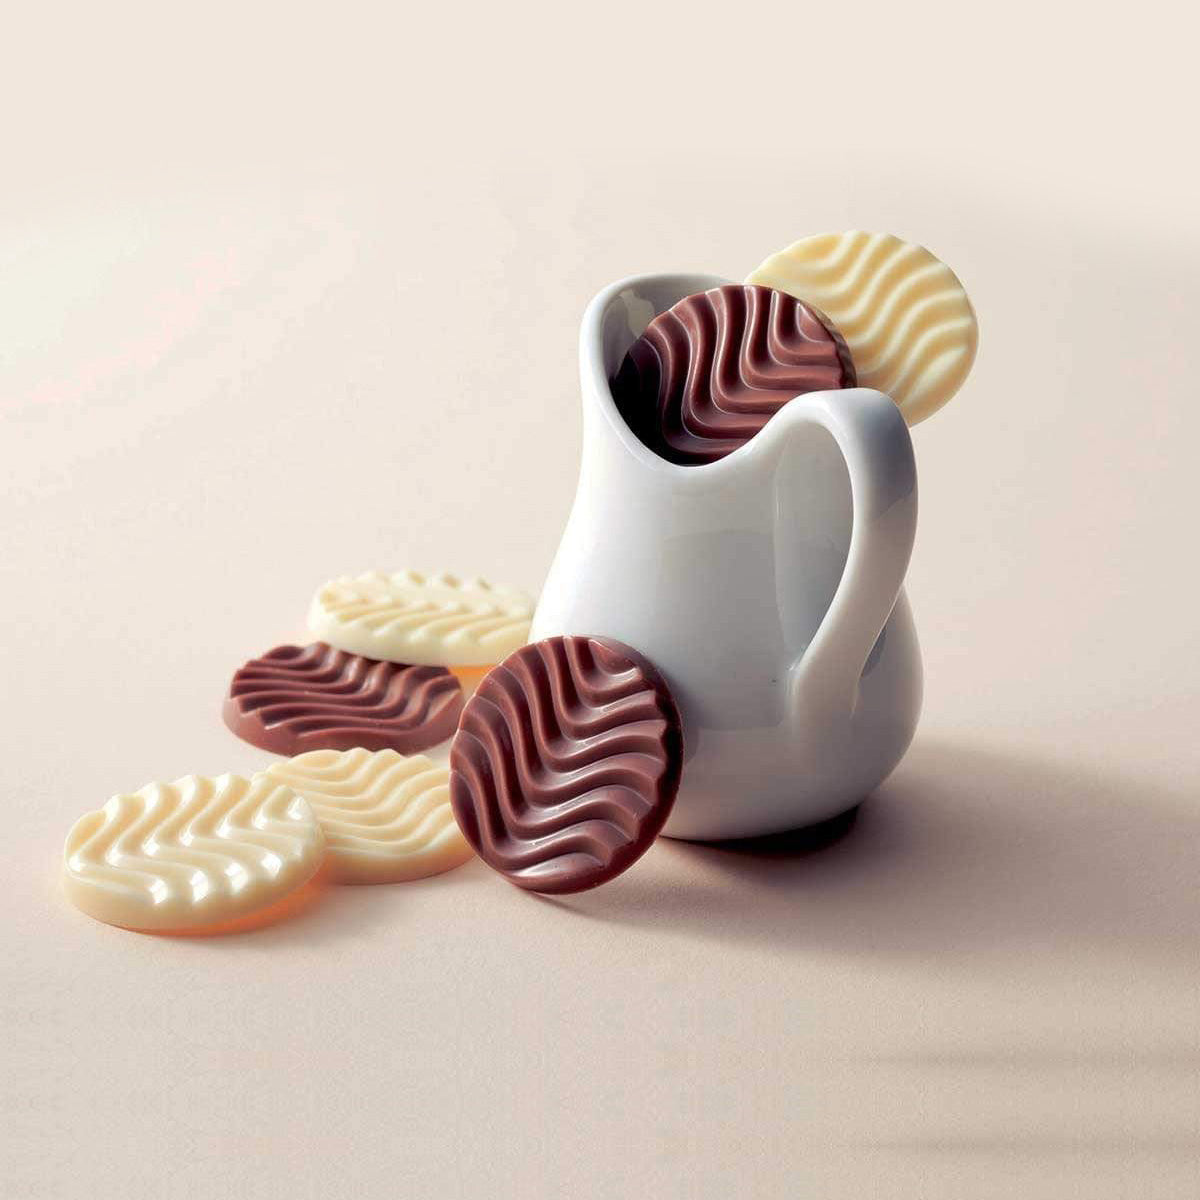 ROYCE' Chocolate - Pure Chocolate "Caramel Milk & Creamy White" - Image shows brown and white chocolate discs, some placed in a white porcelain mug. Background is in light brown.